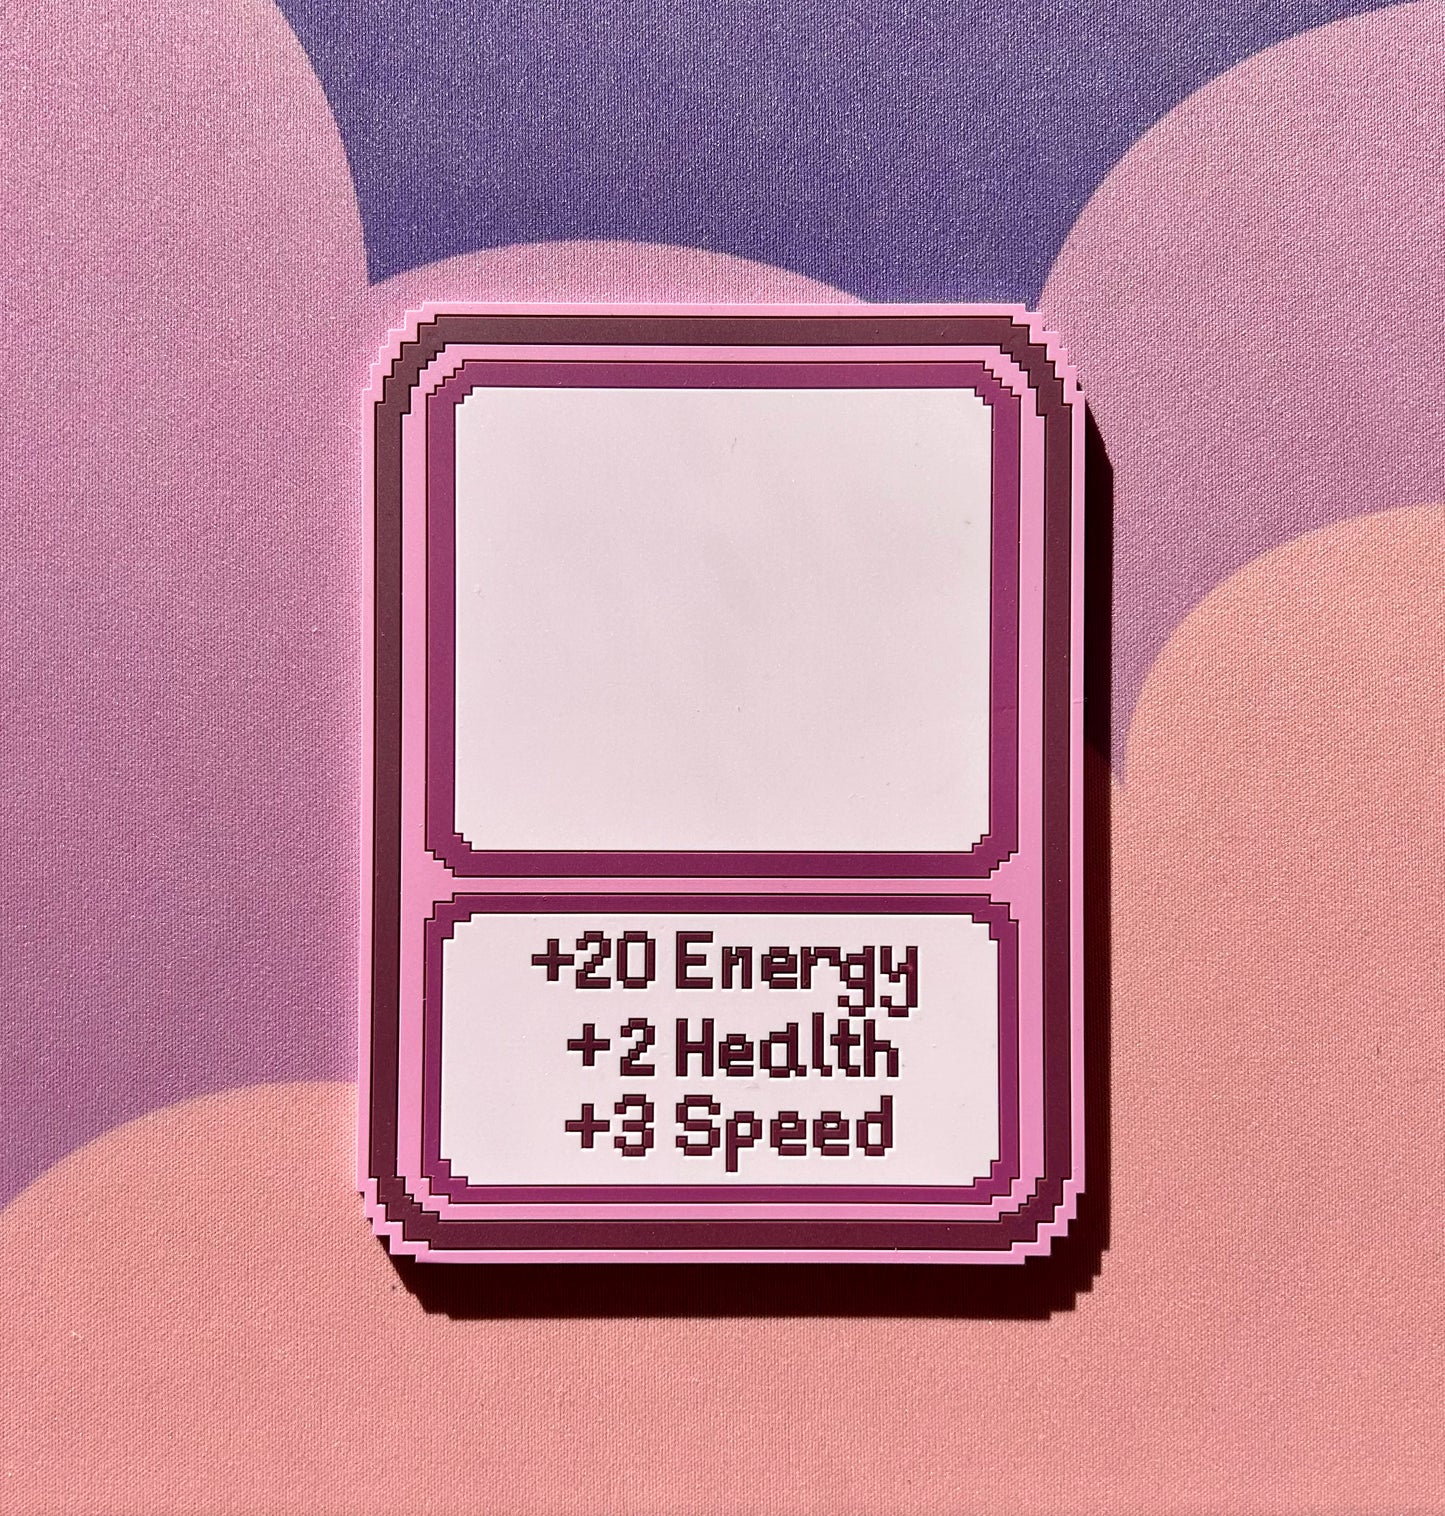 Drink Stats Coasters